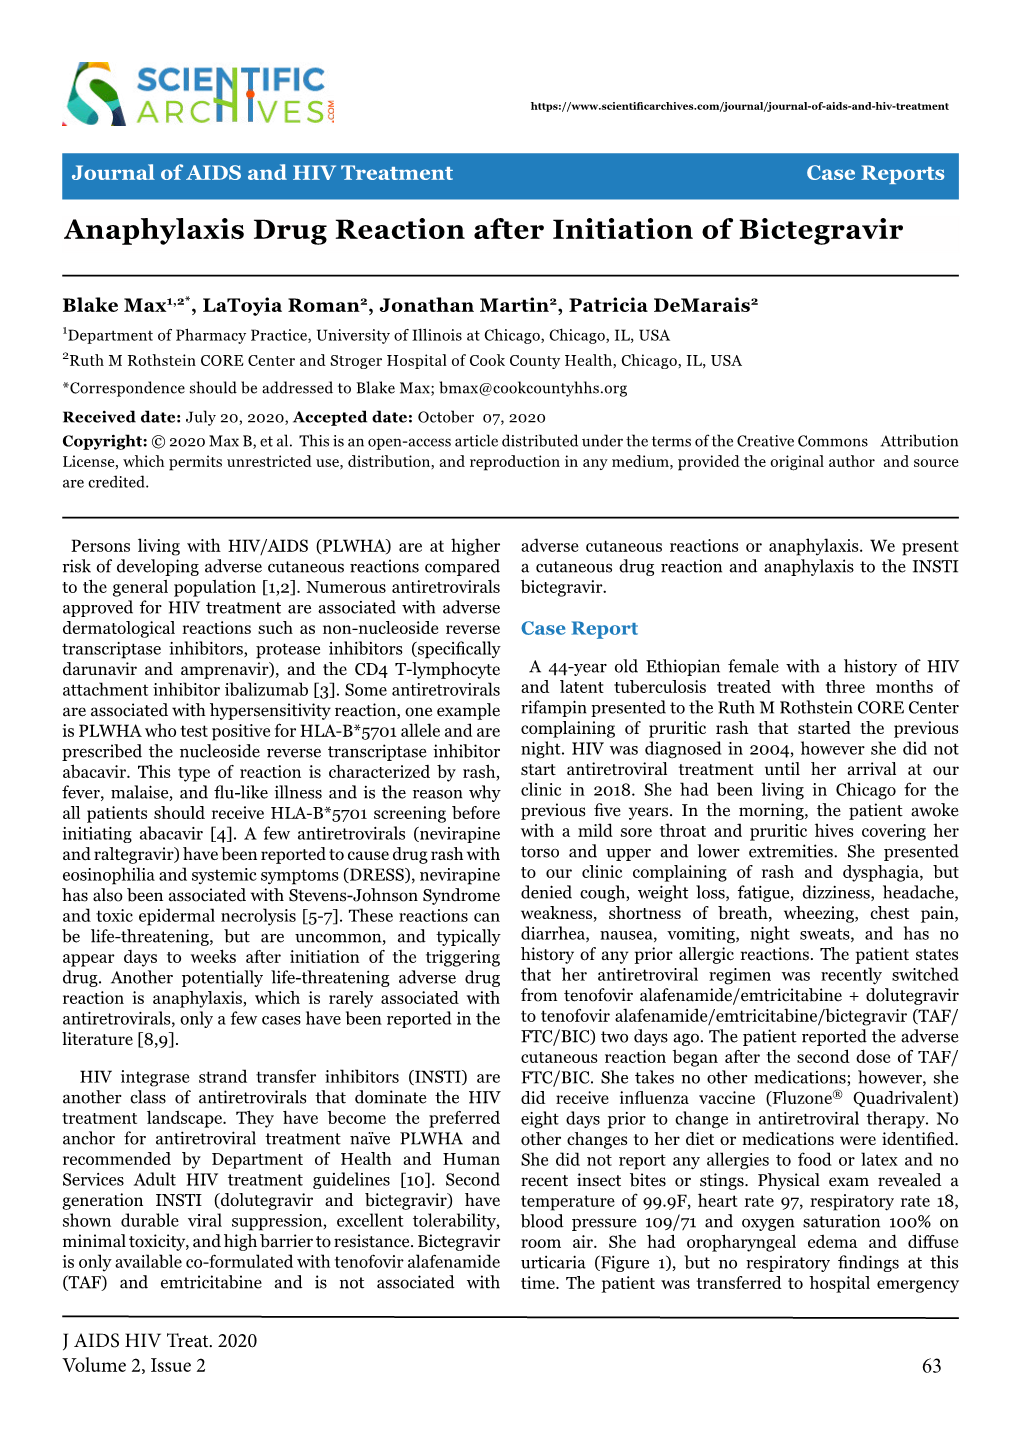 Anaphylaxis Drug Reaction After Initiation of Bictegravir